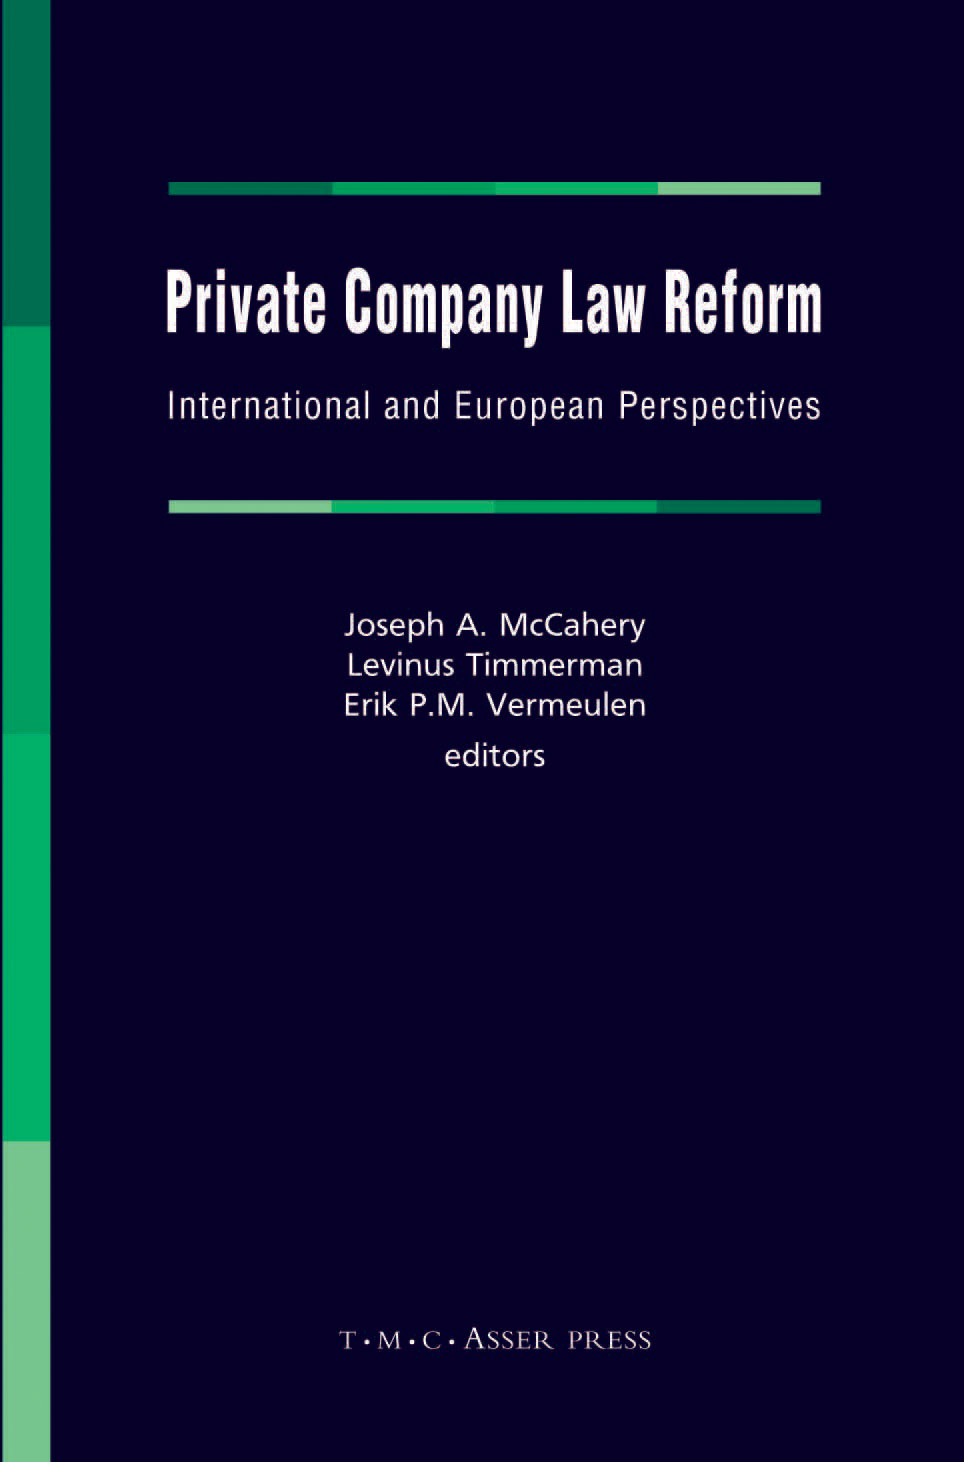 Private Company Law Reform - International and European Perspectives